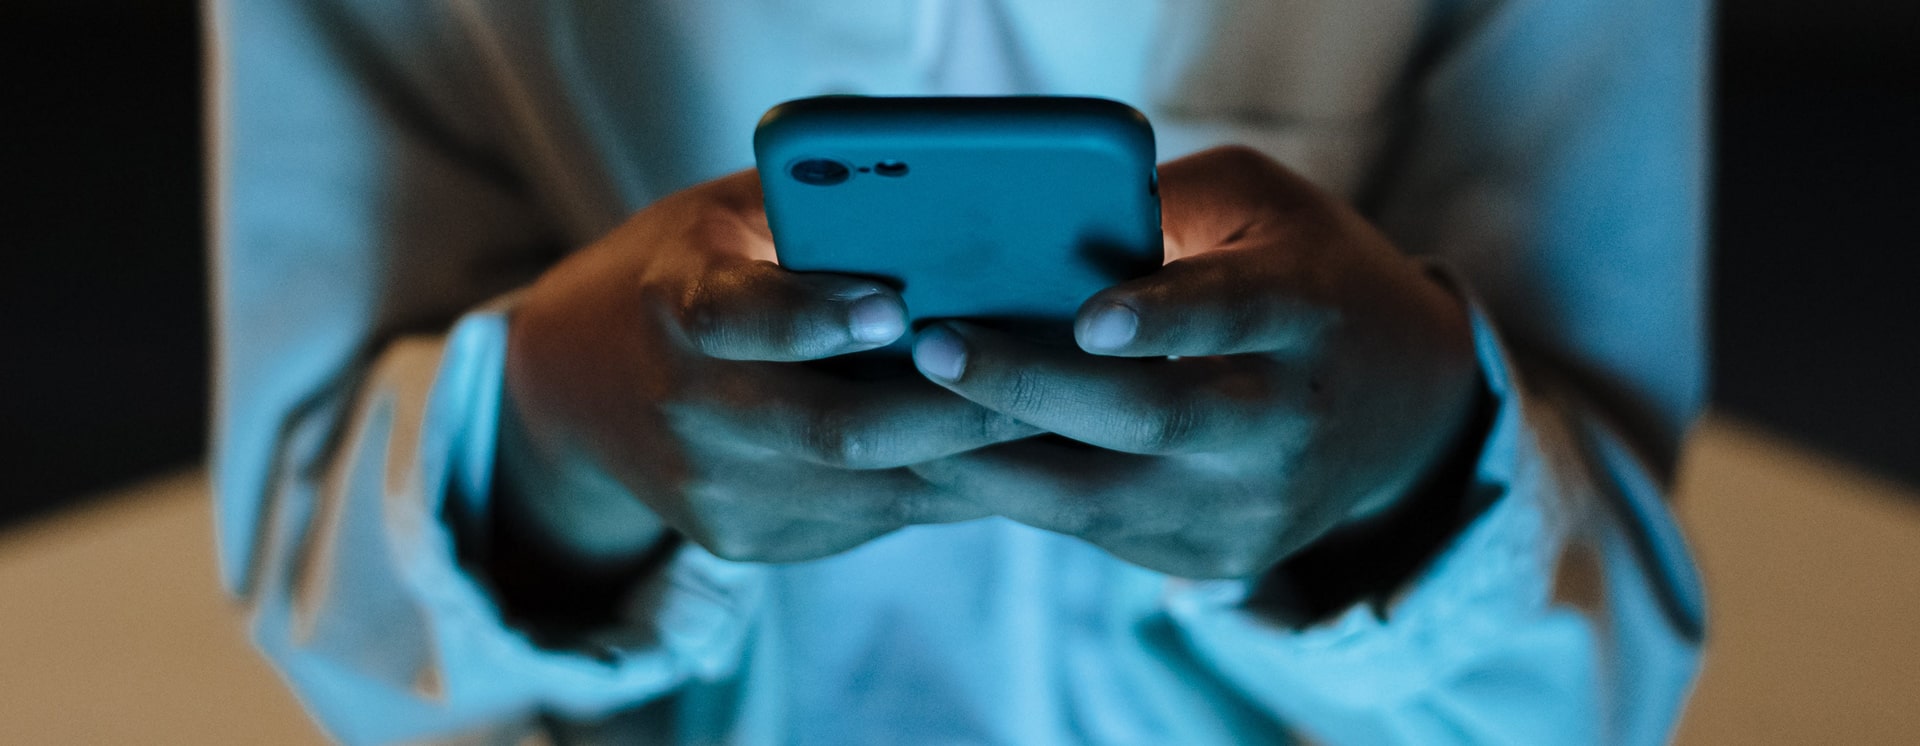 A young person's hands holding and using a smartphone in low light